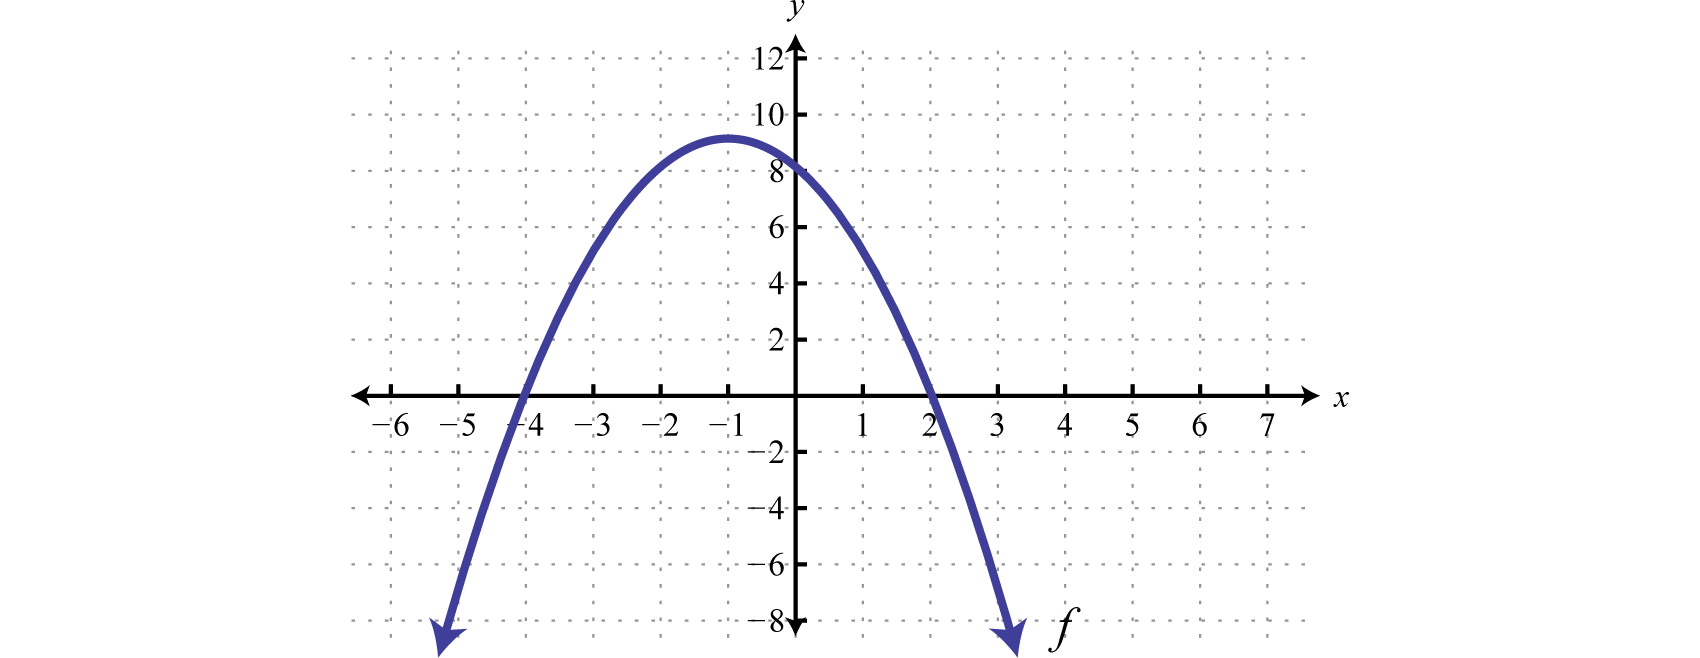 Graph of function f(x)